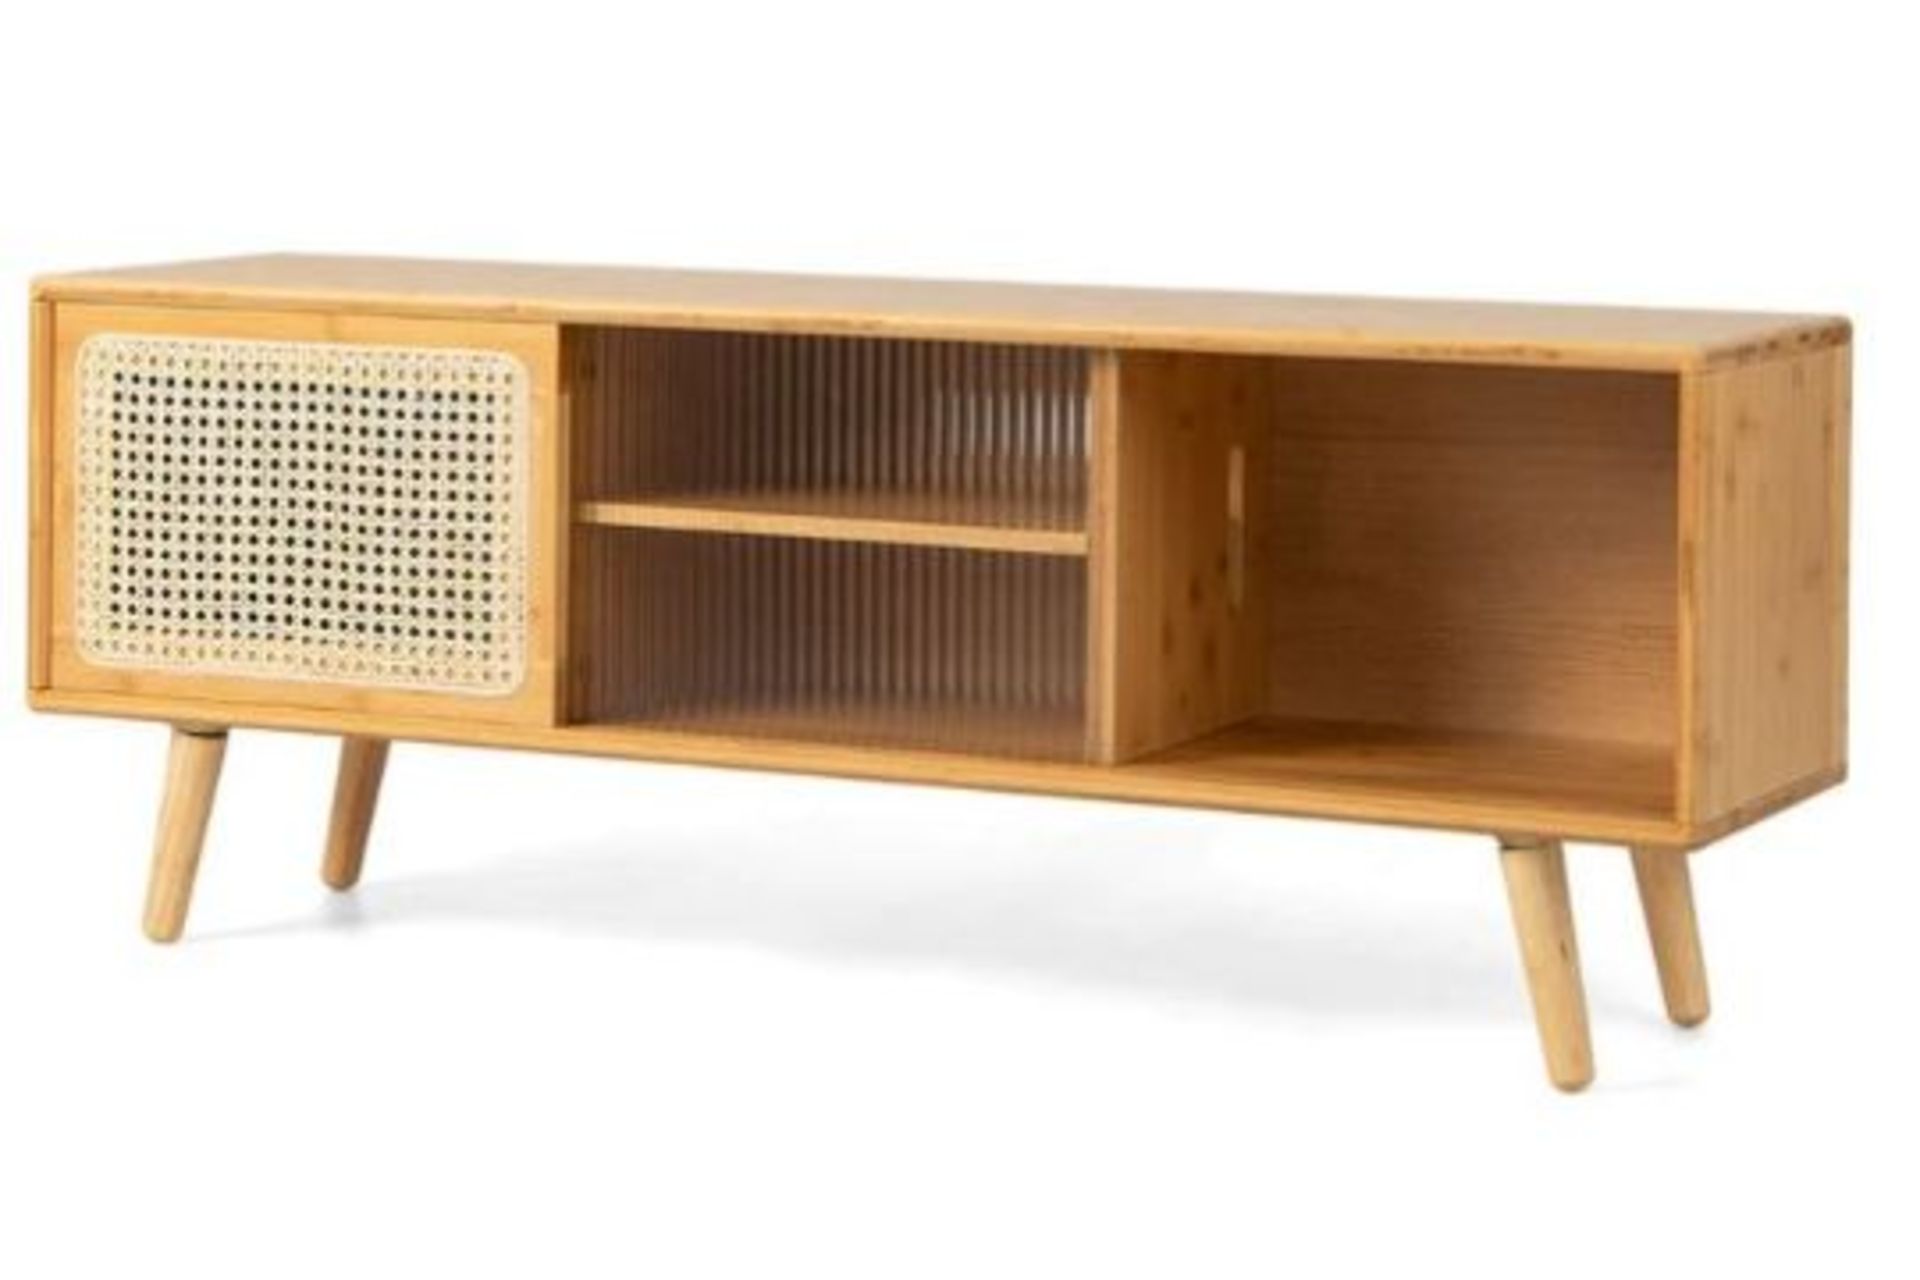 BAMBOO ENTERTAINMENT CENTER WITH RATTAN AND TEMPERED GLASS SLIDING DOORS-NATURAL. - R14.2